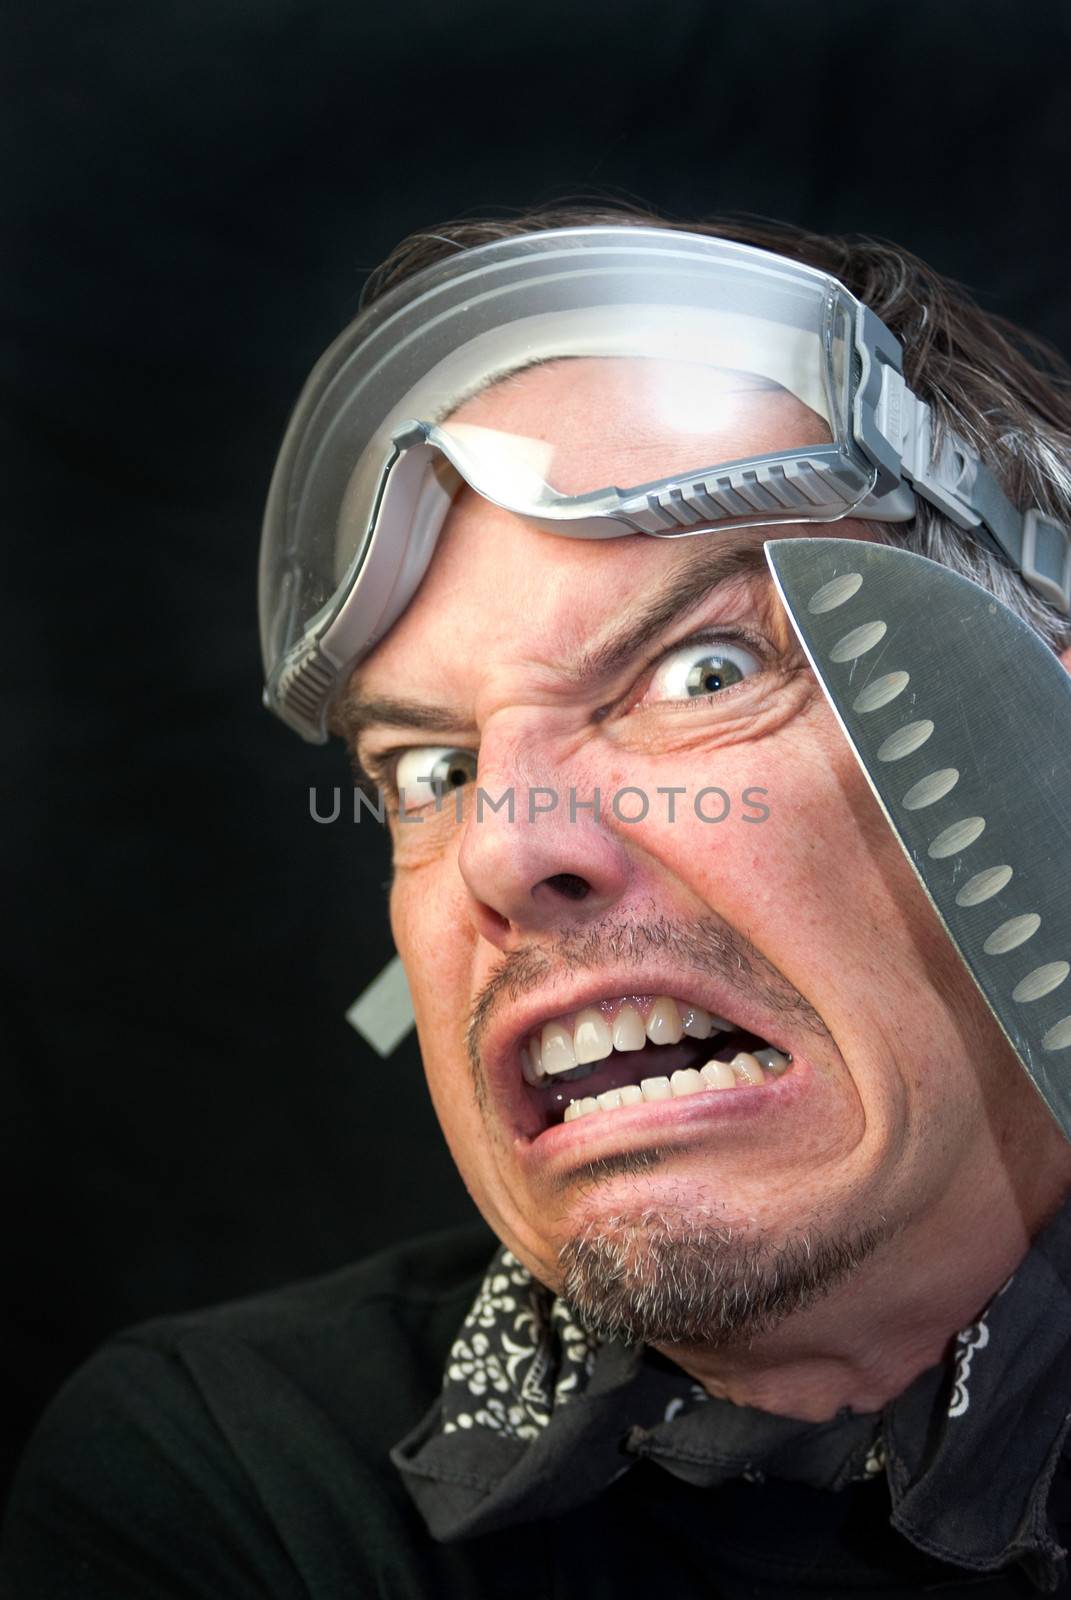 Close-up of a crazy man wearing goggles with a knife loking afraid.